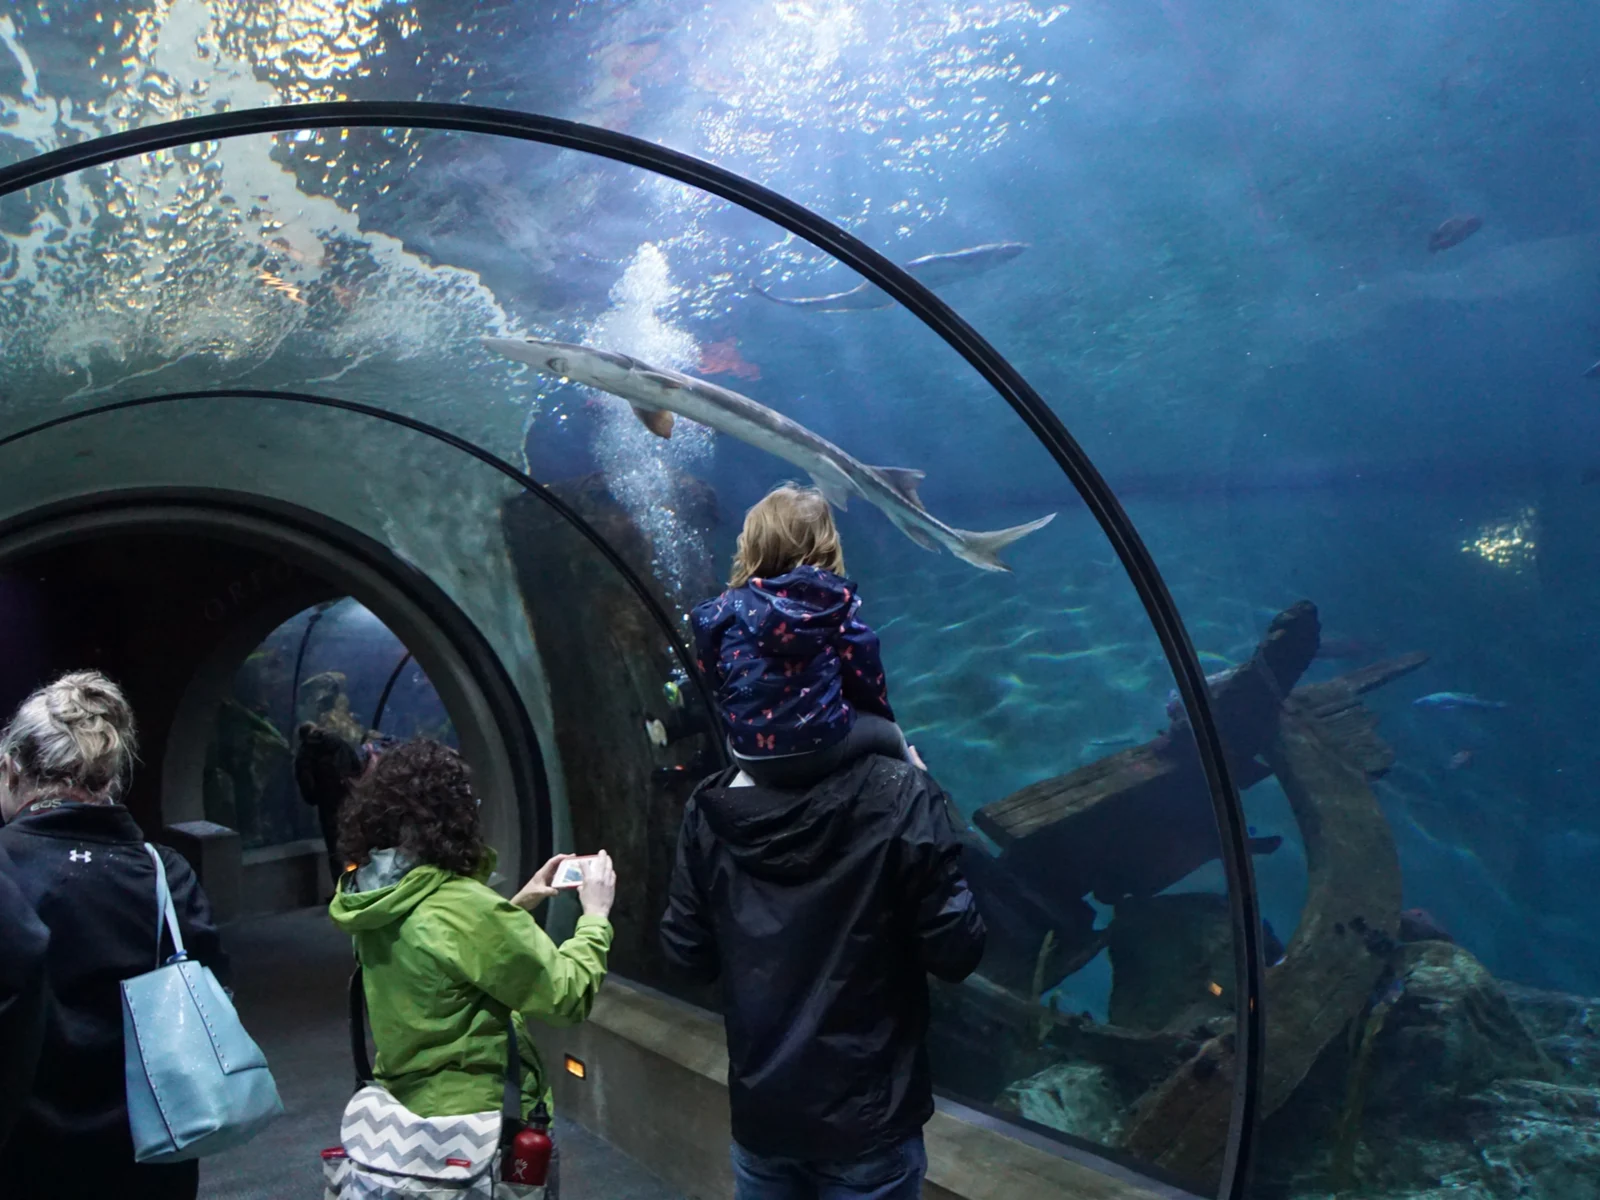 A family visiting the tunnel aquarium at the Newport Aquarium, one of the best aquariums in the US, where the father carries his toddler on his shoulder while the mother prepares to take a picture